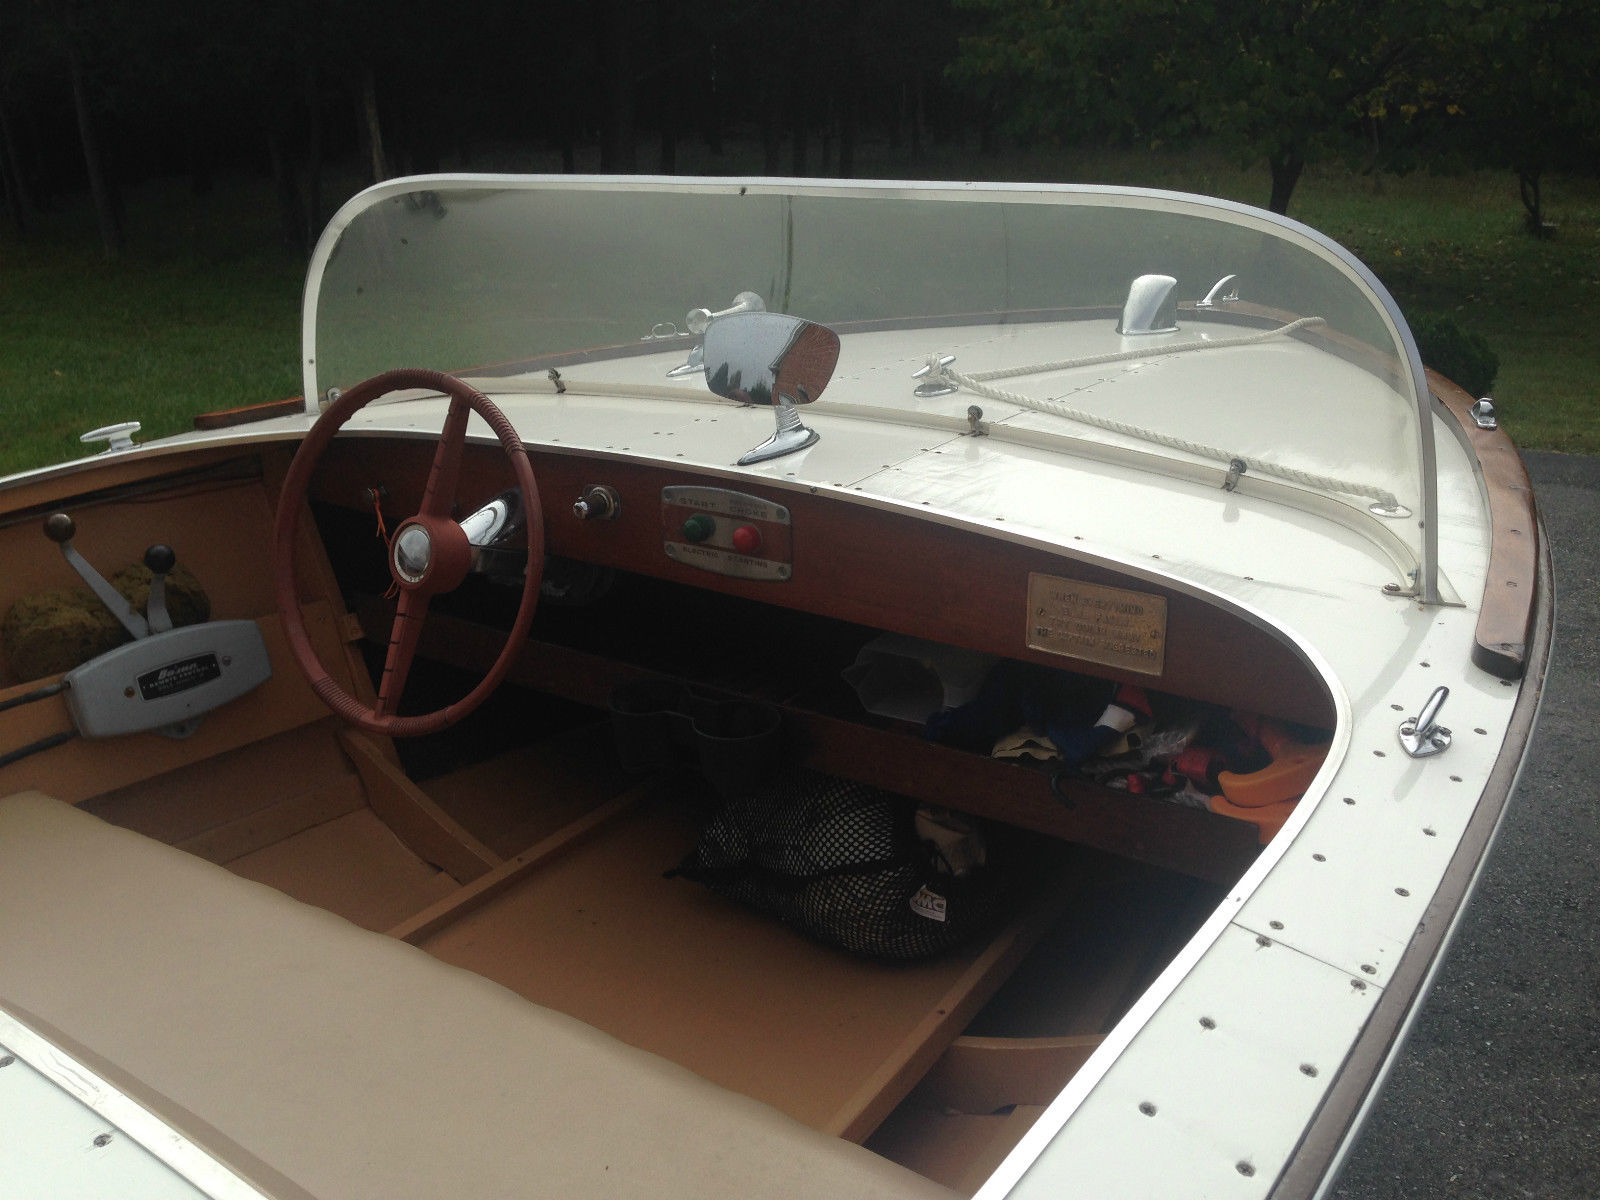 Chris Craft Barracuda 1956 for sale for $9,000 - Boats 